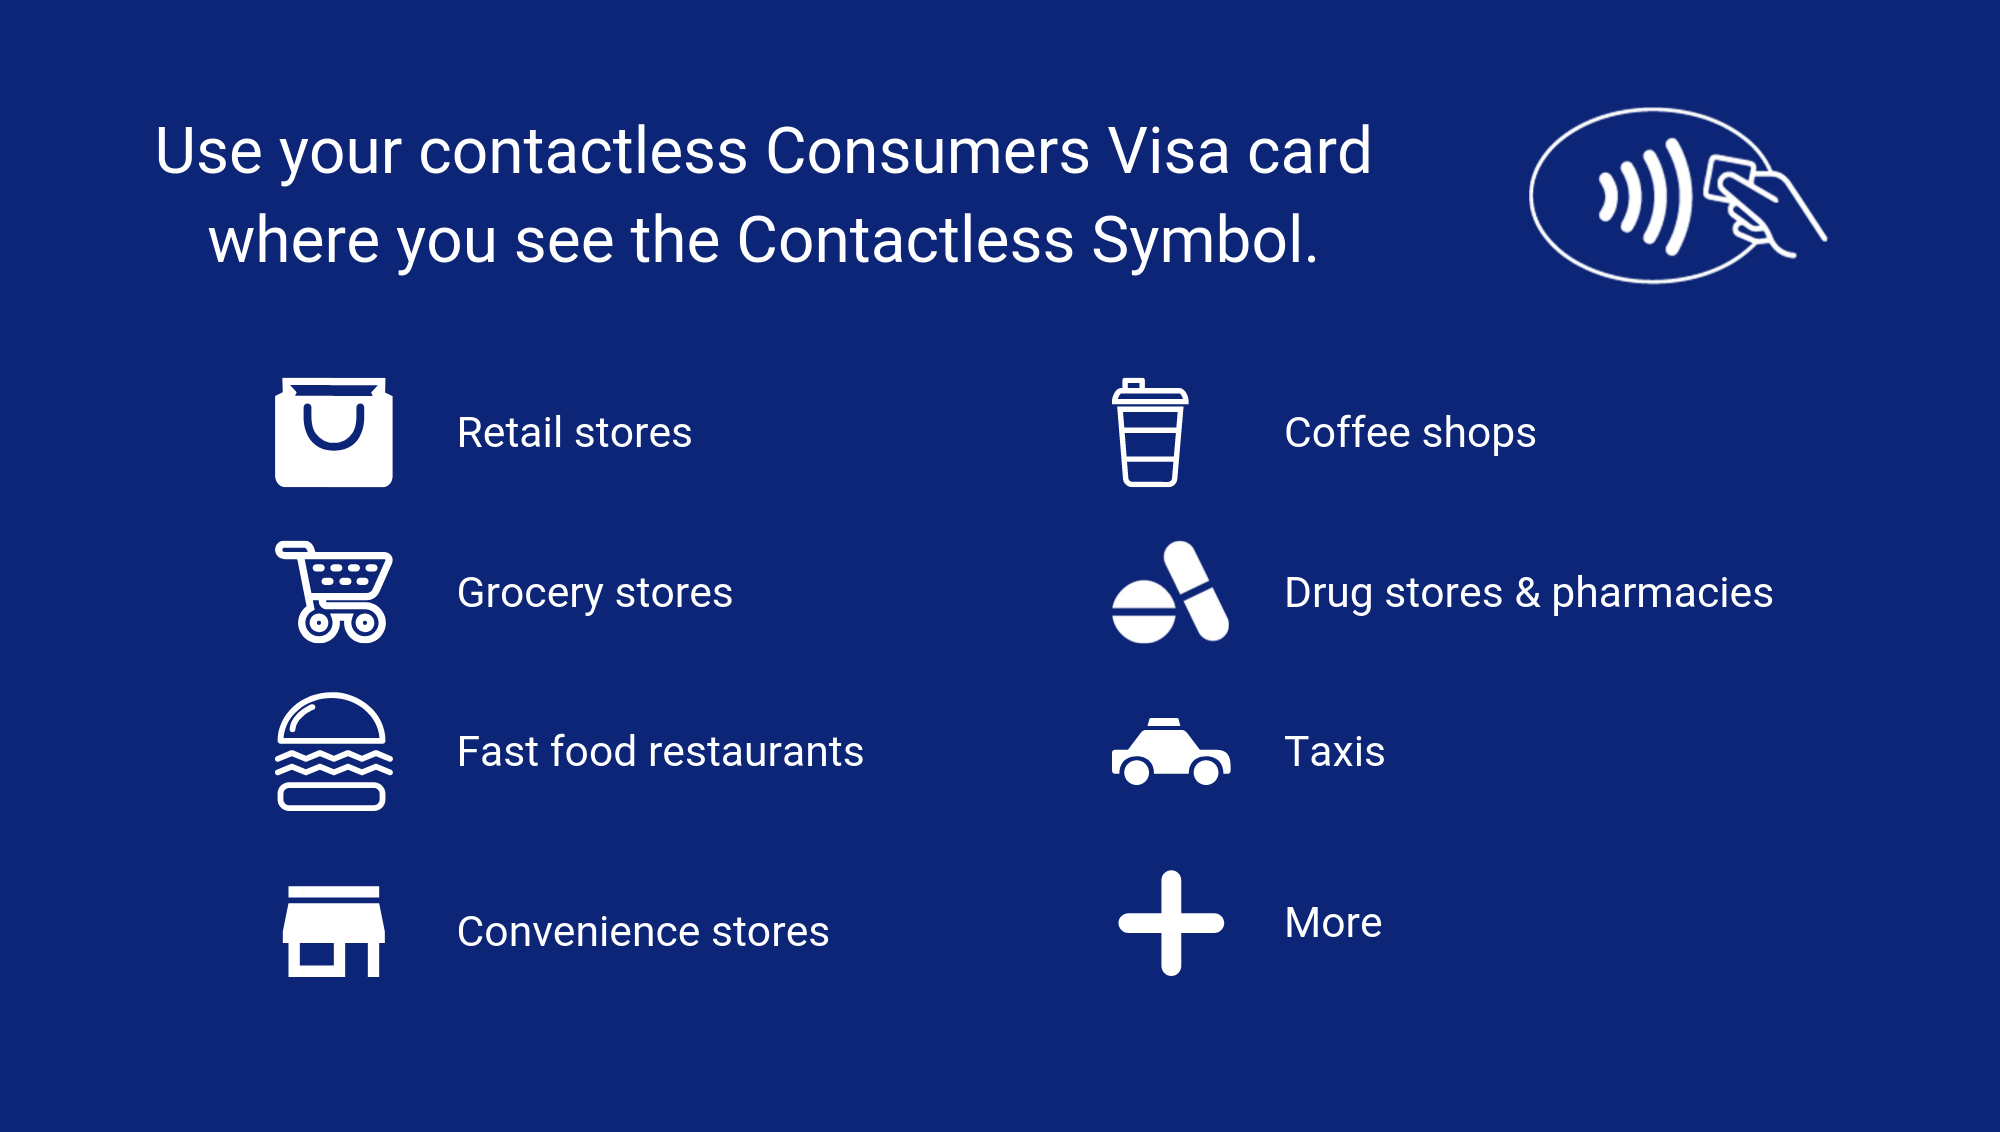 use your contactless consumers visa card where you see the contactless symbol. retail stores grocery stores fast food restaurants convenience stores coffee shops drug store & pharmacies taxis more